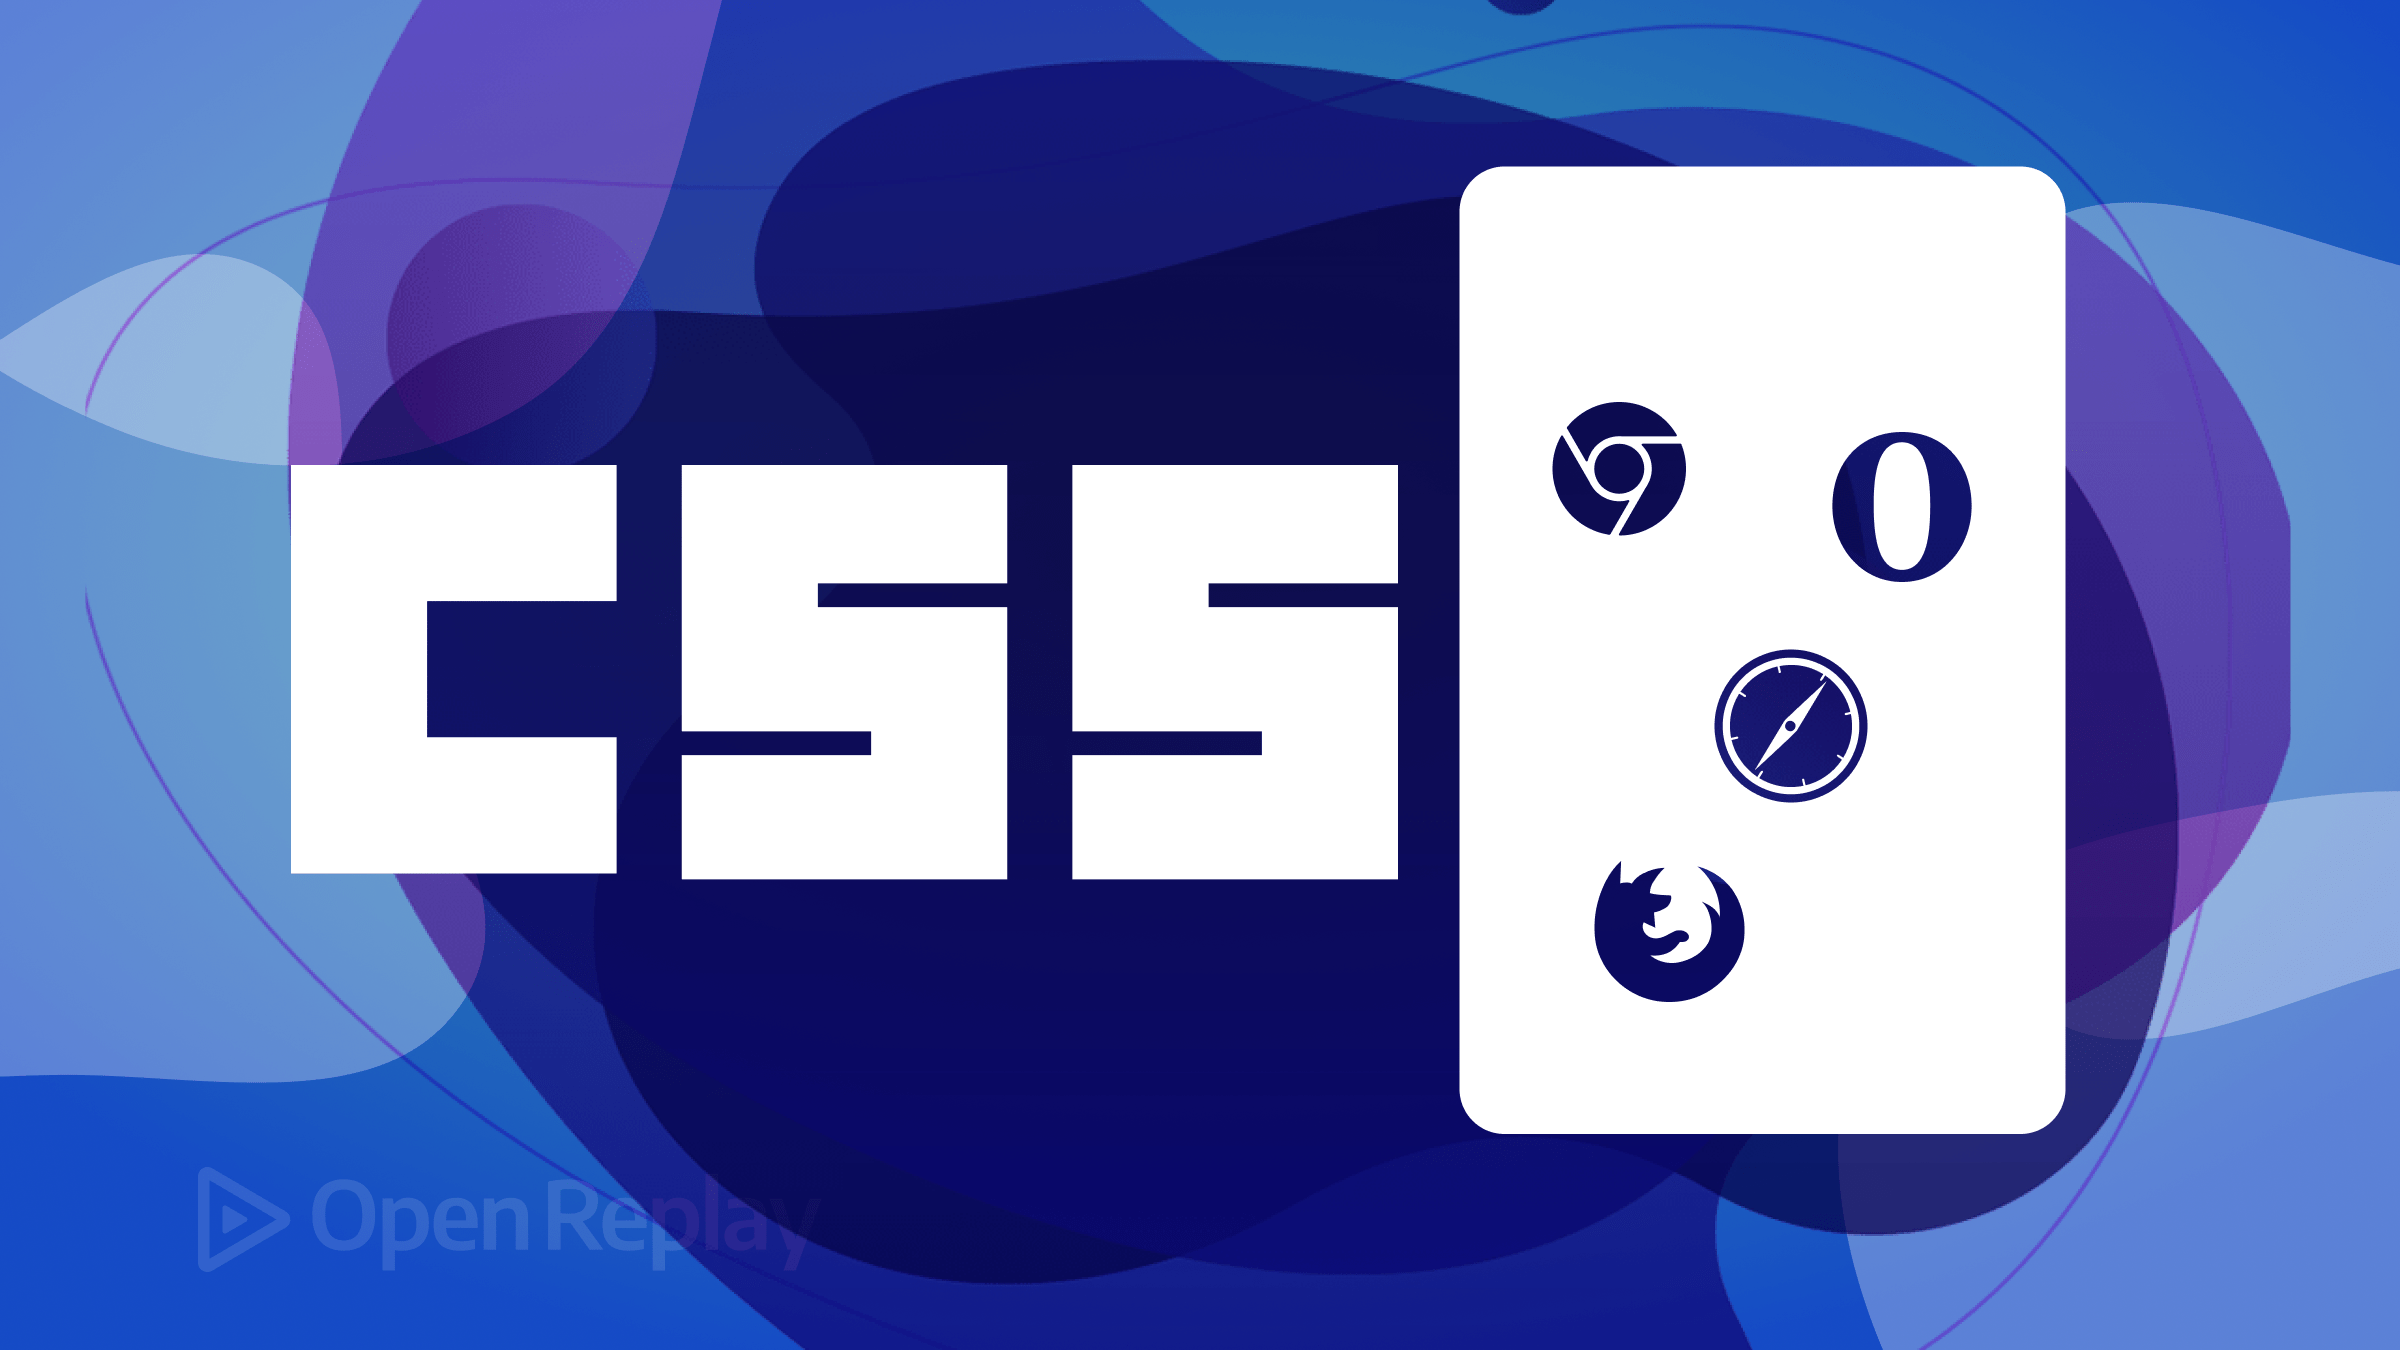 Implementing CSS for Older Browsers